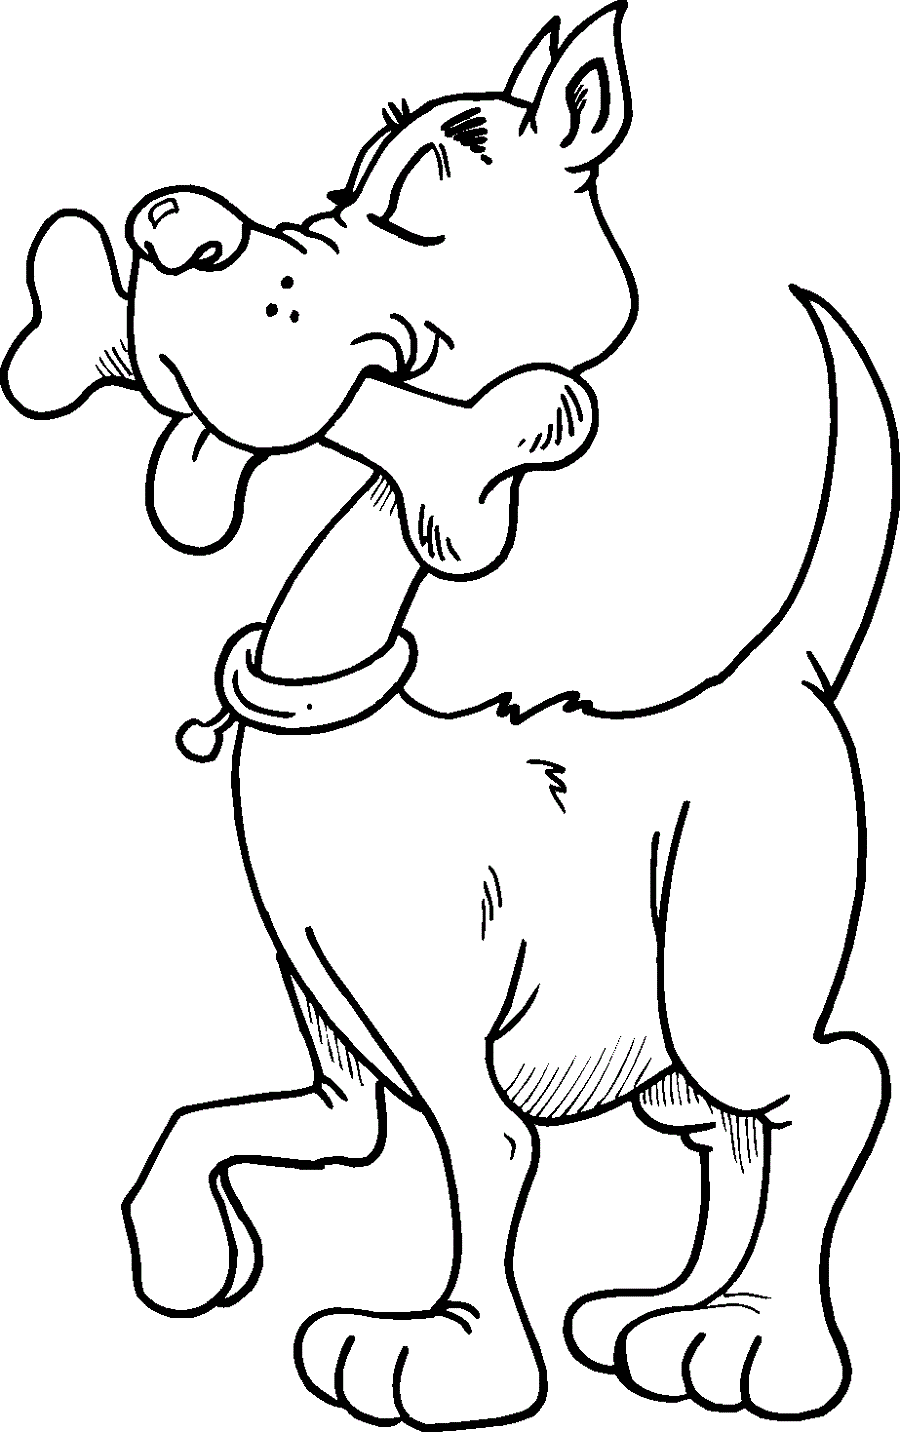 Online Coloring Pages for Kids Cartoon